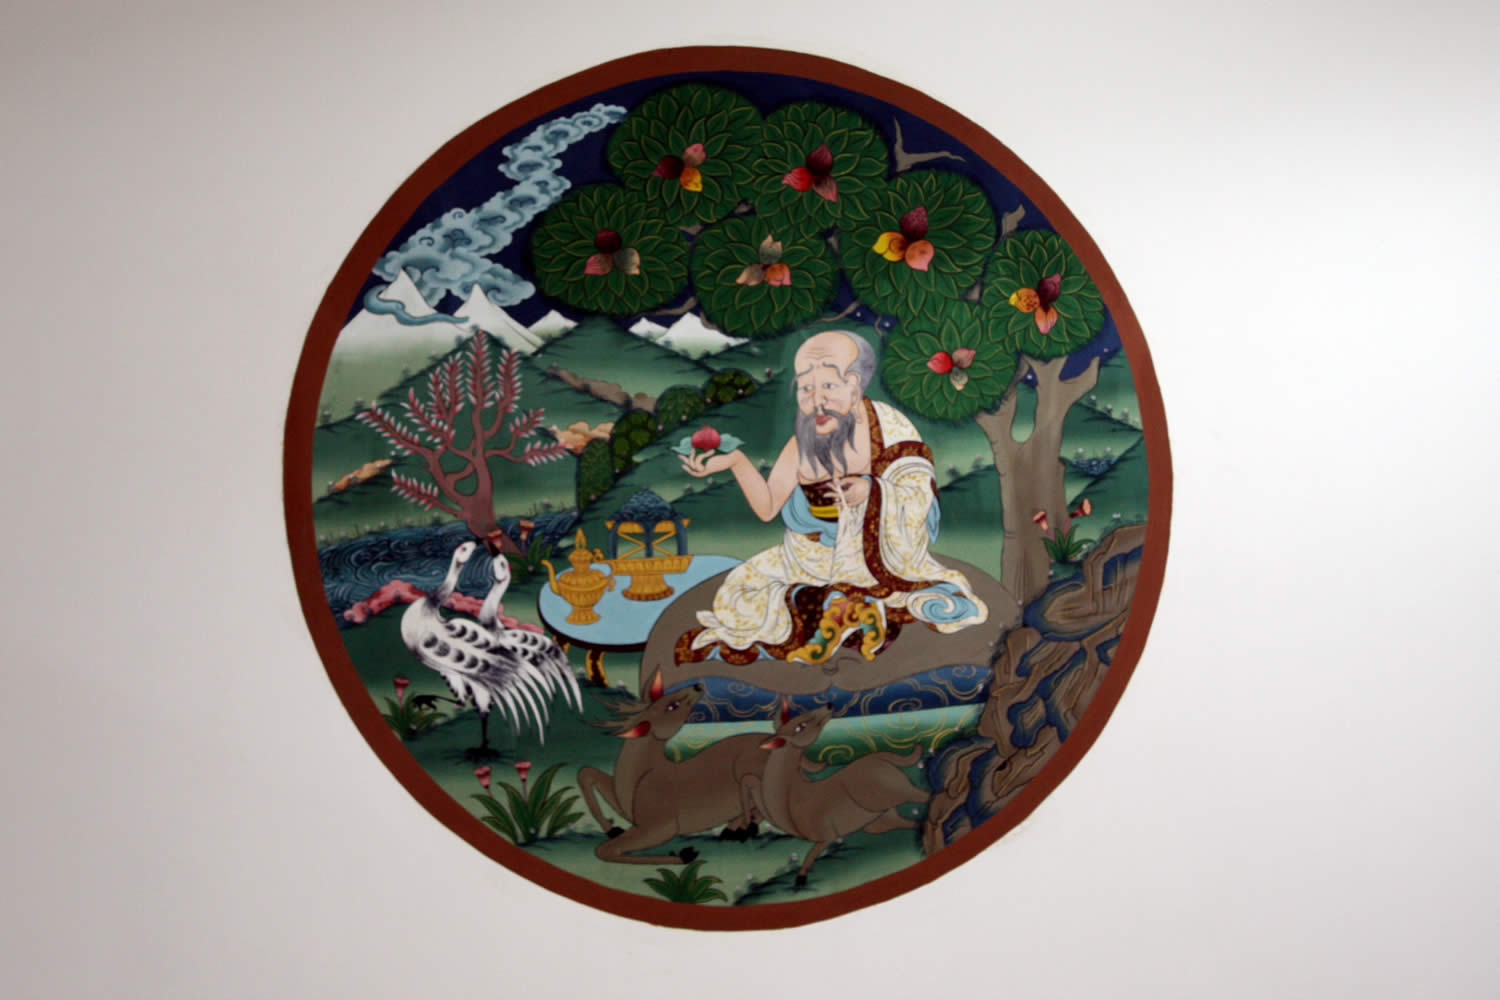 The airport entrance is decorated with an emblem of a mahasiddha.